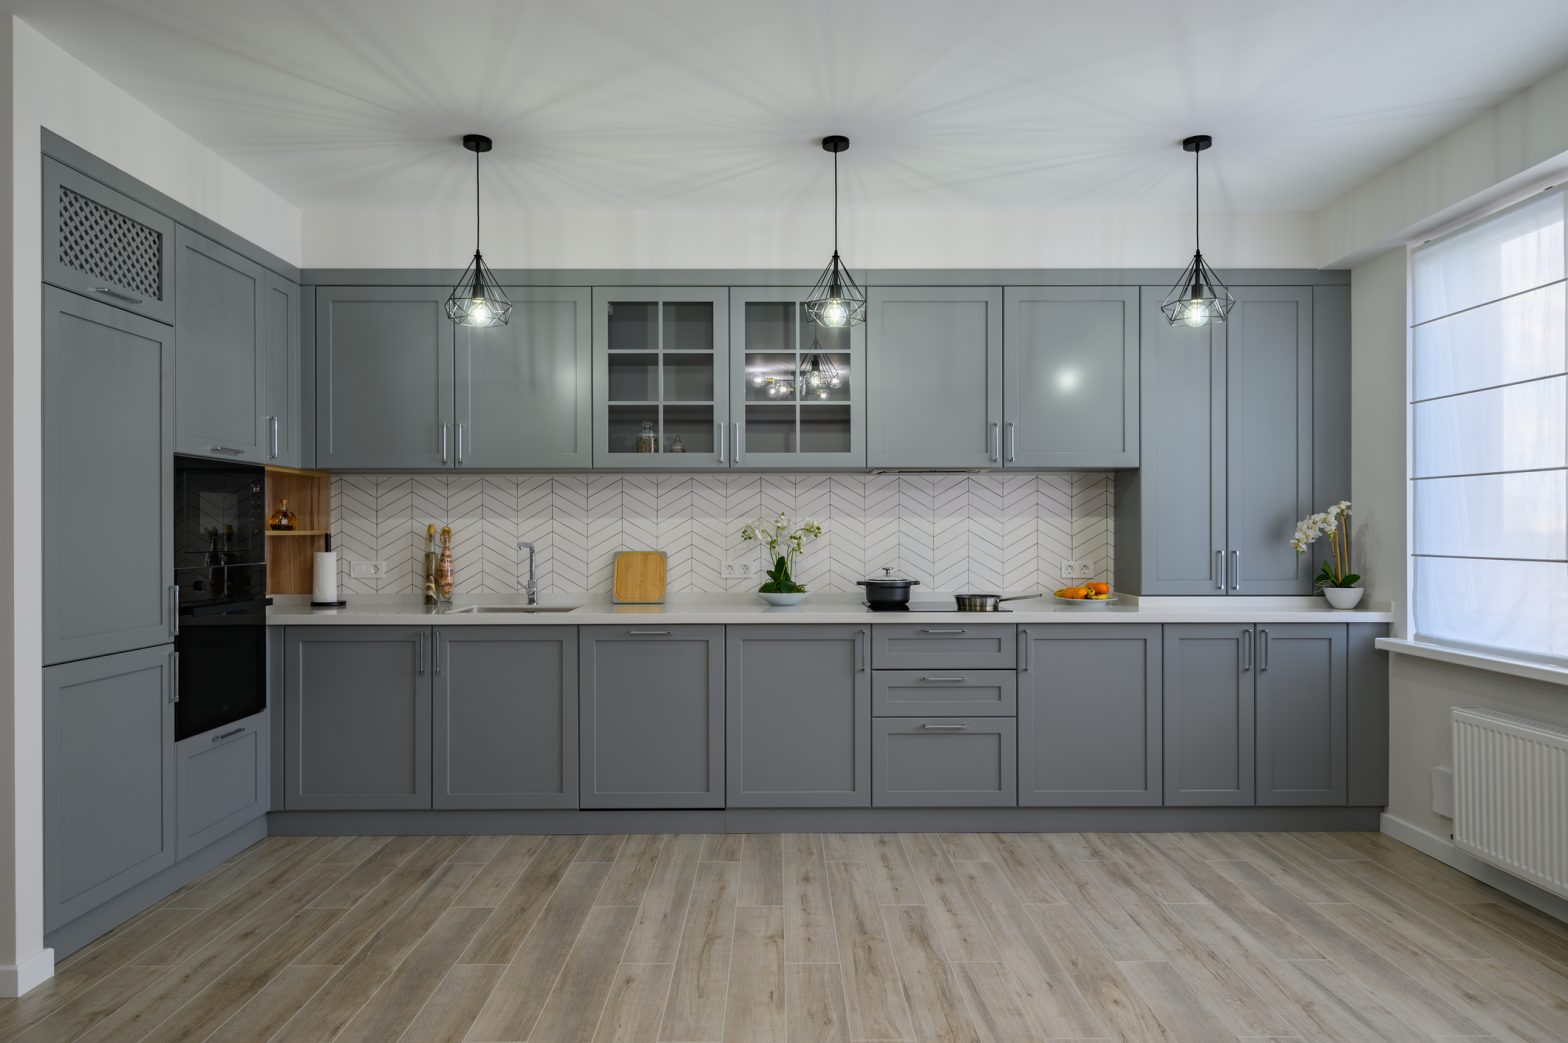 kitchen cabinets with the wall space above called a soffit